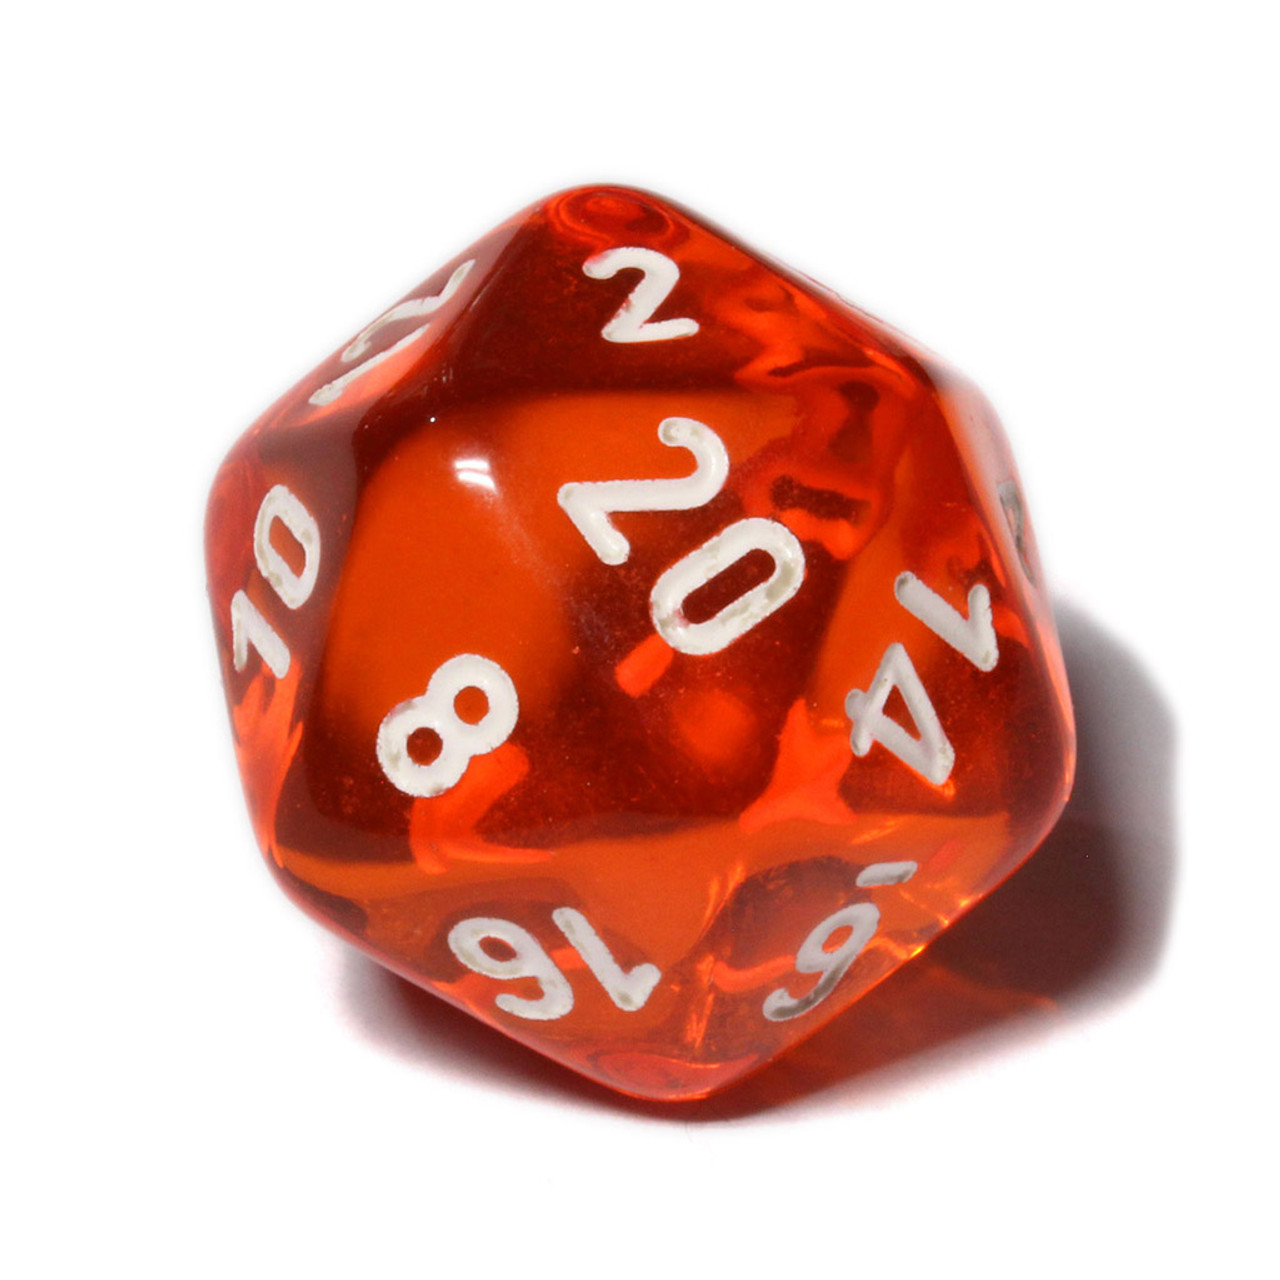 A red 20 sided die with the 20 facing upwards